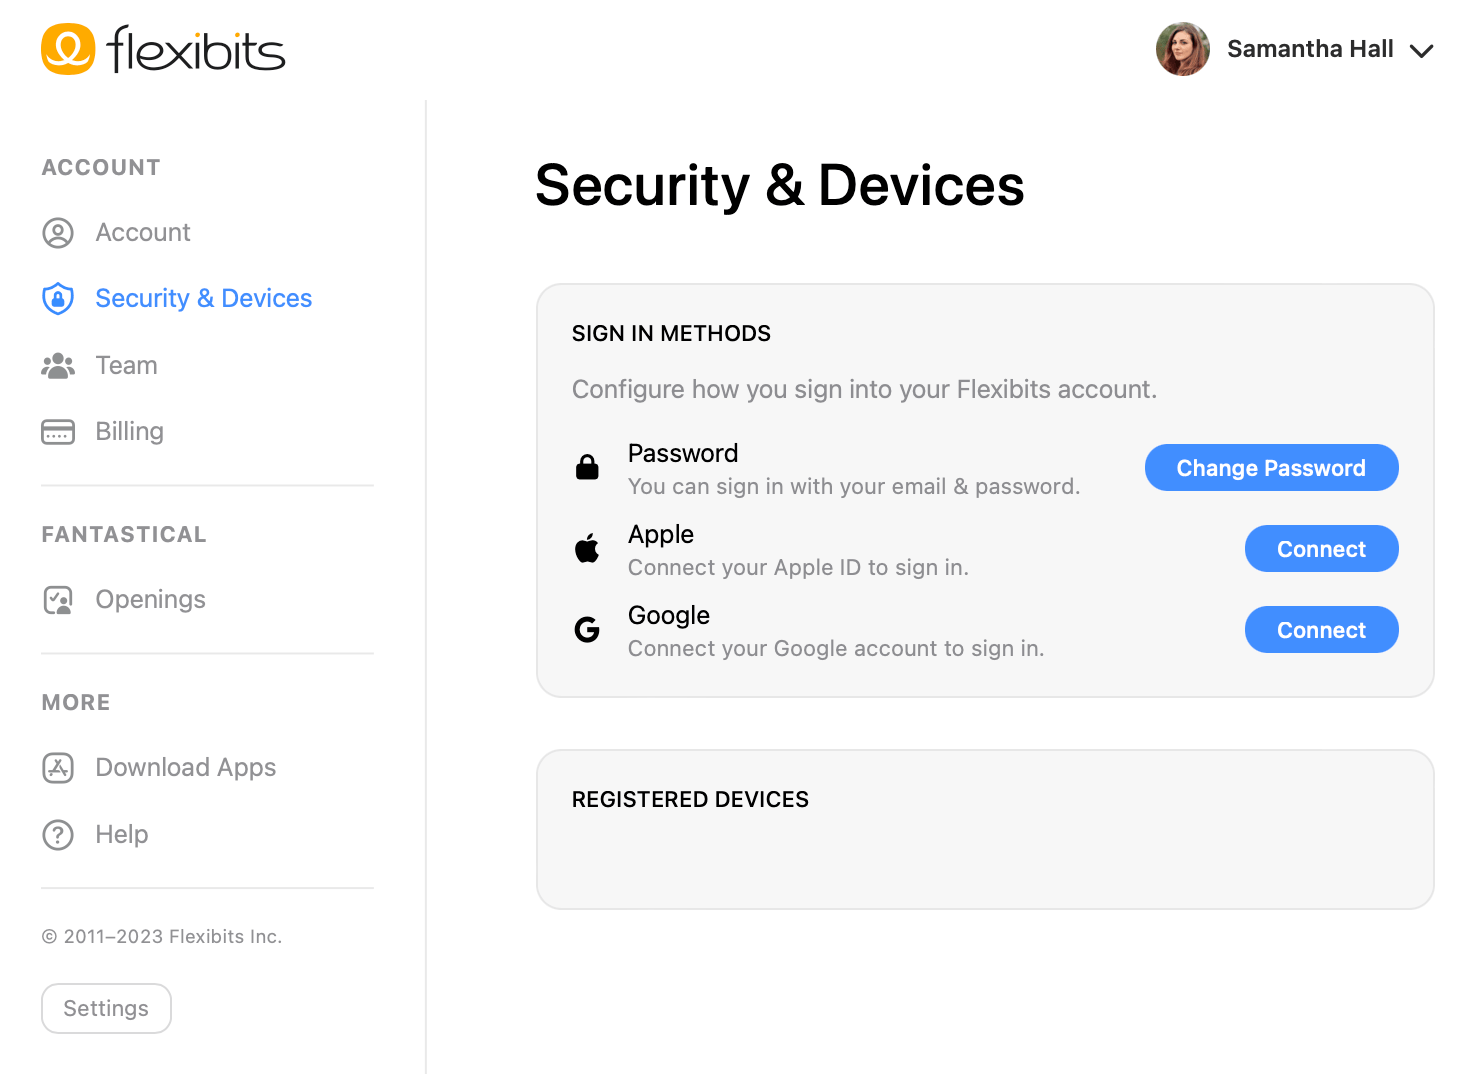 Security & Devices